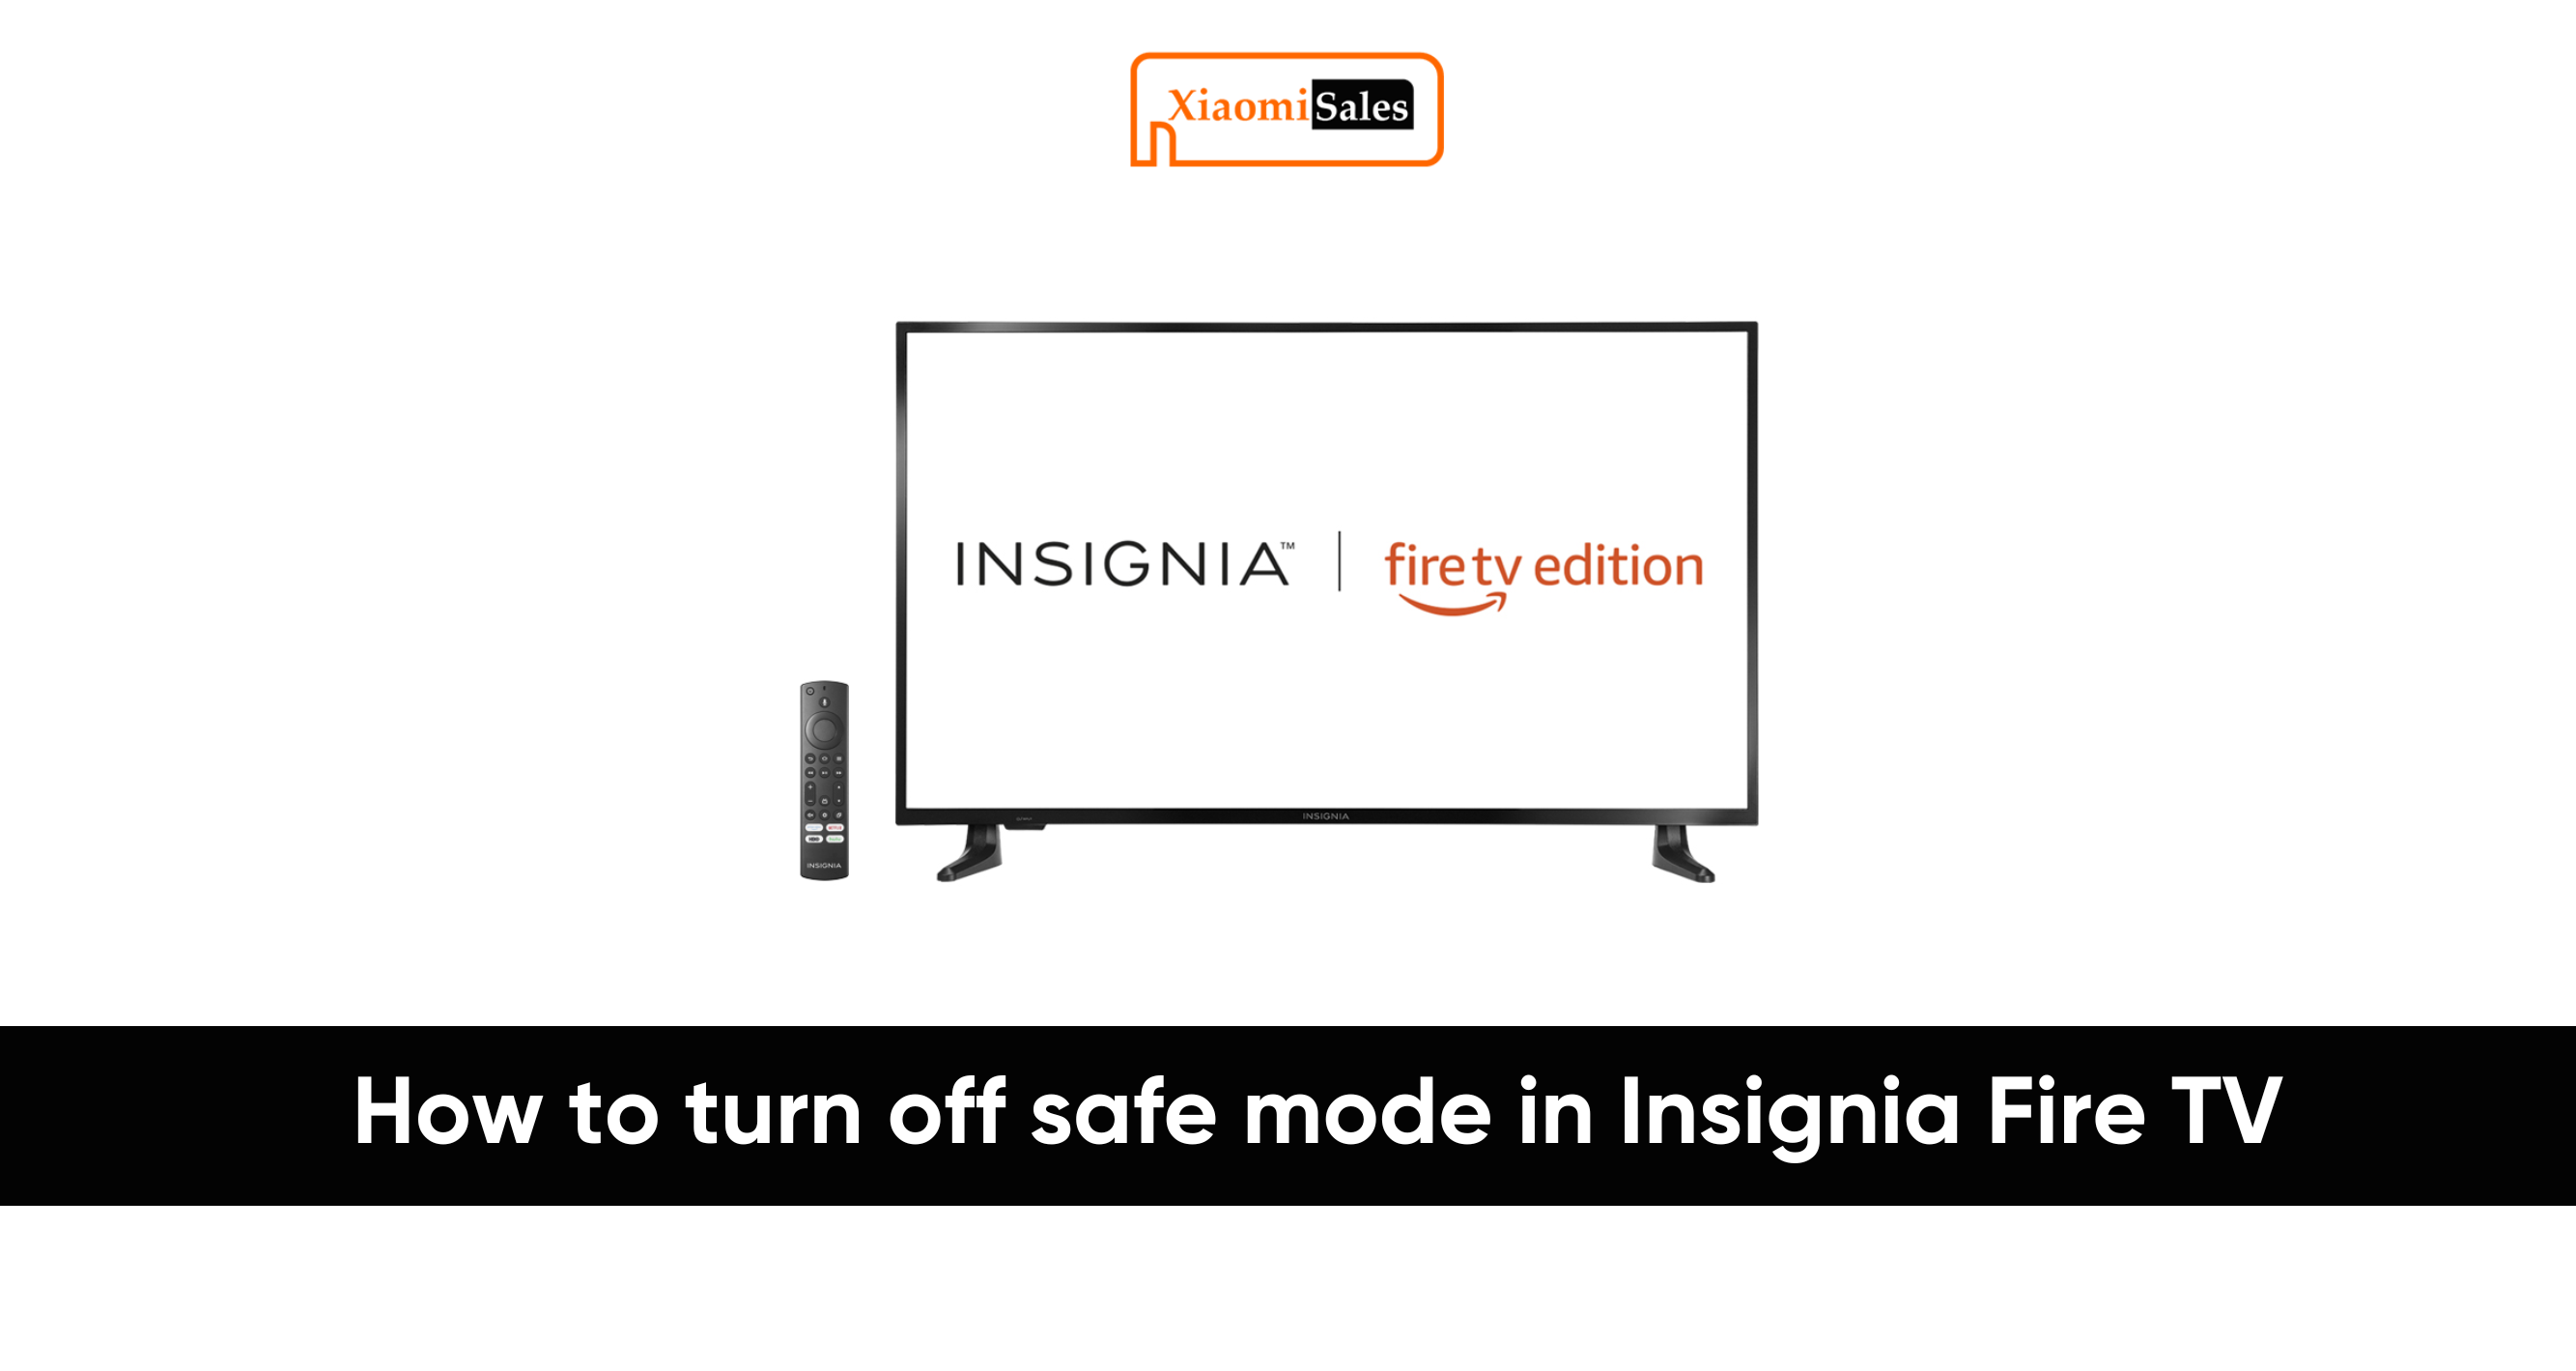 24 How To Turn Off Safe Mode On Insignia Fire Tv
10/2022